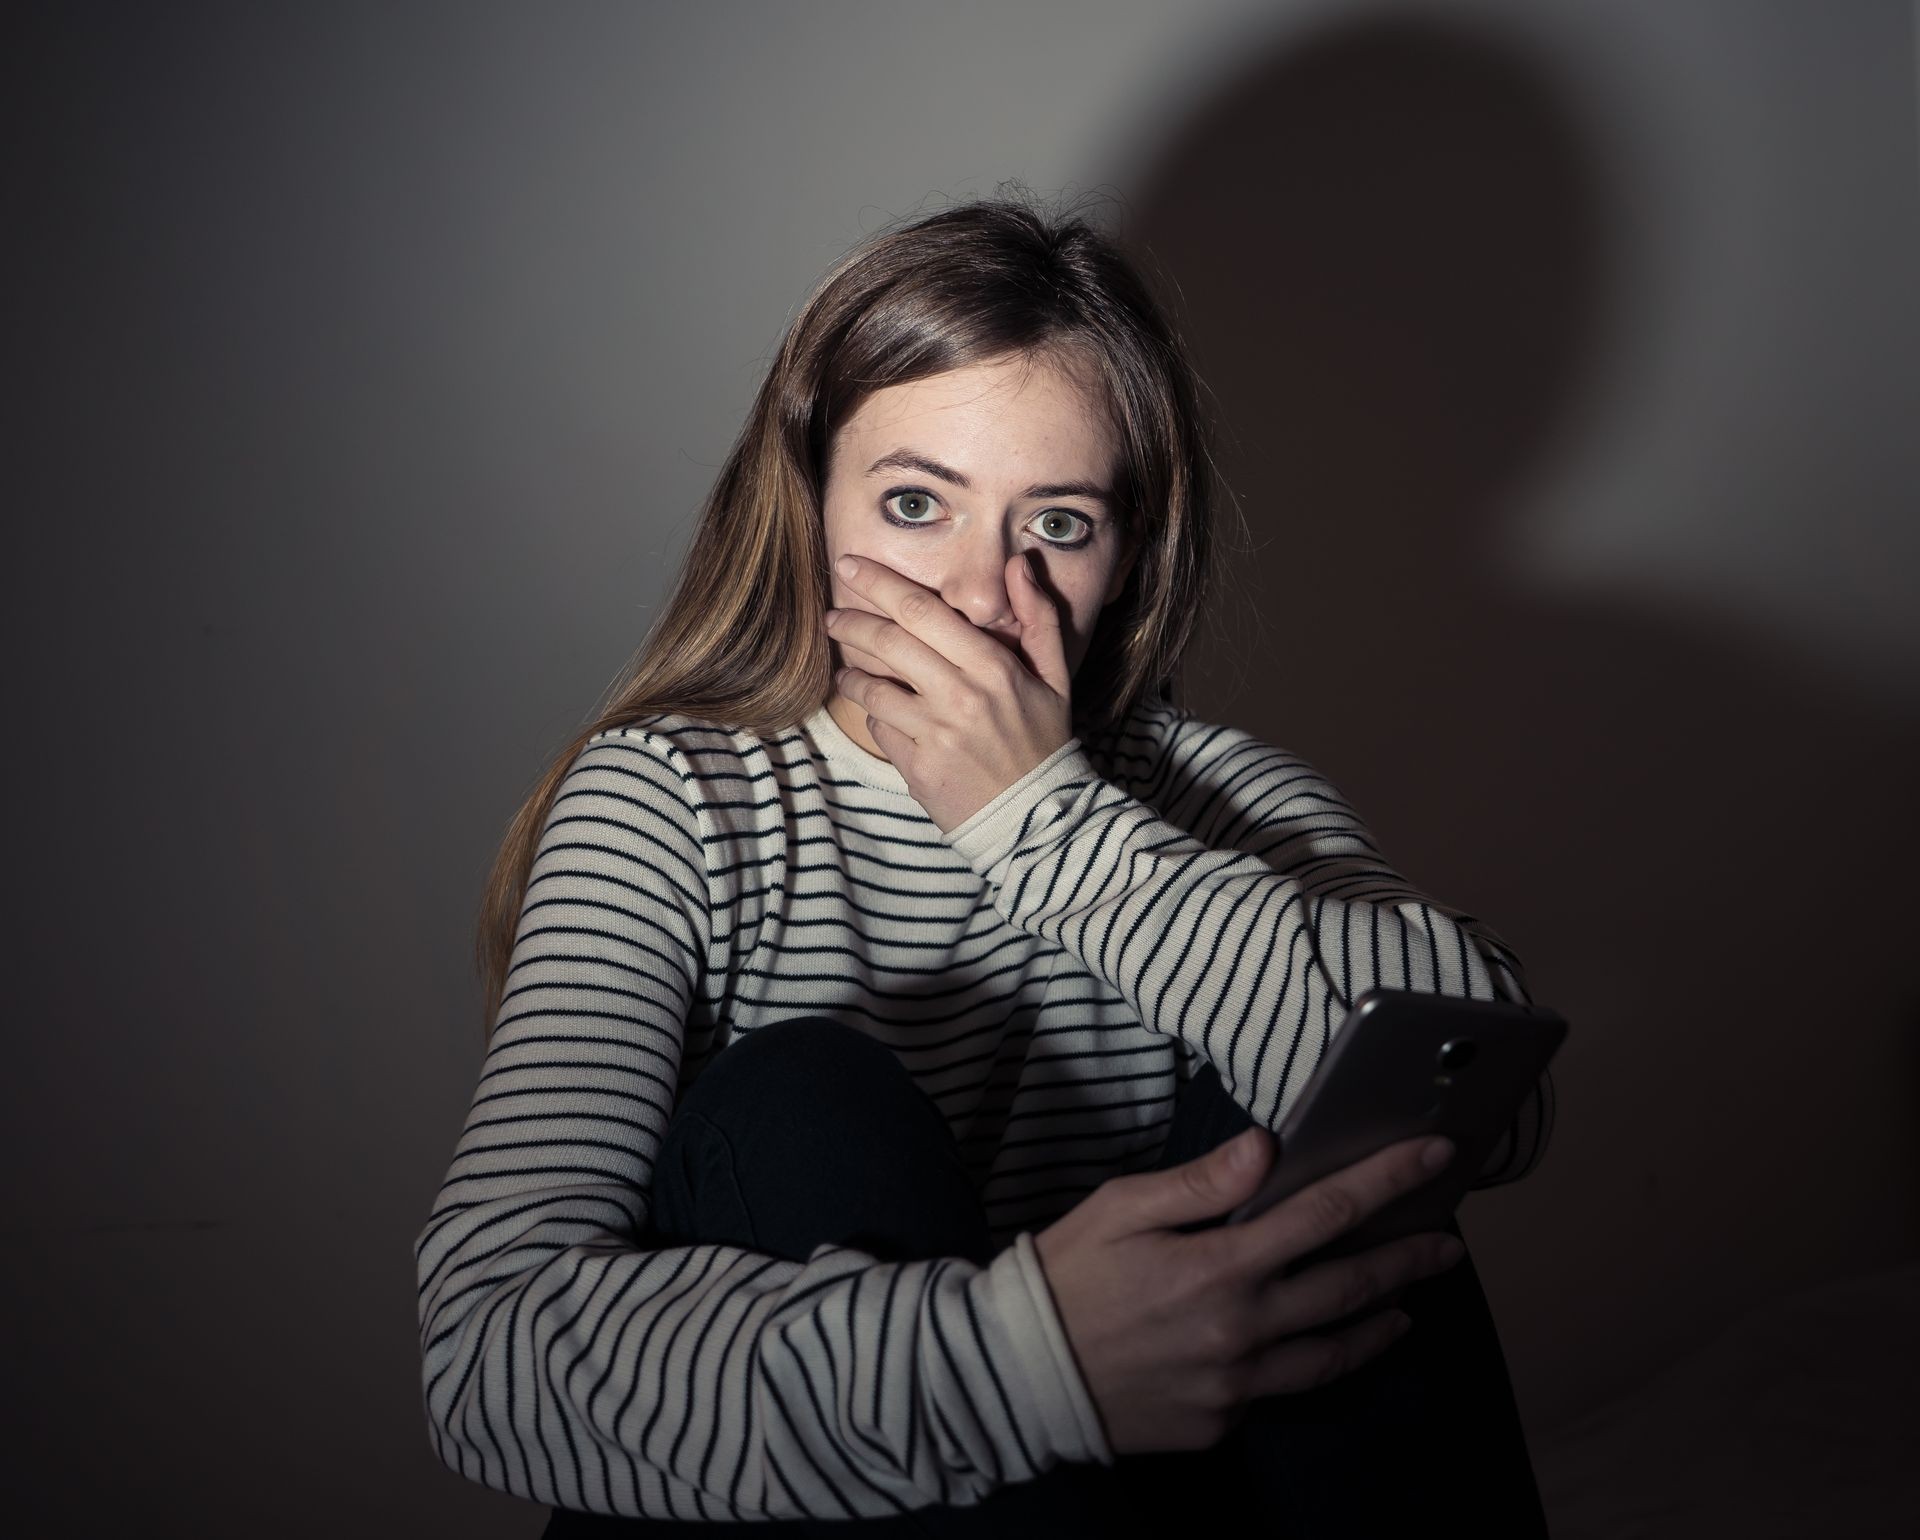 Sad desperate young teenager female girl on smart phone suffering from online bulling and harassment felling lonely and hopeless sitting on bed at night. CYberbullying and dangers of internet concept.